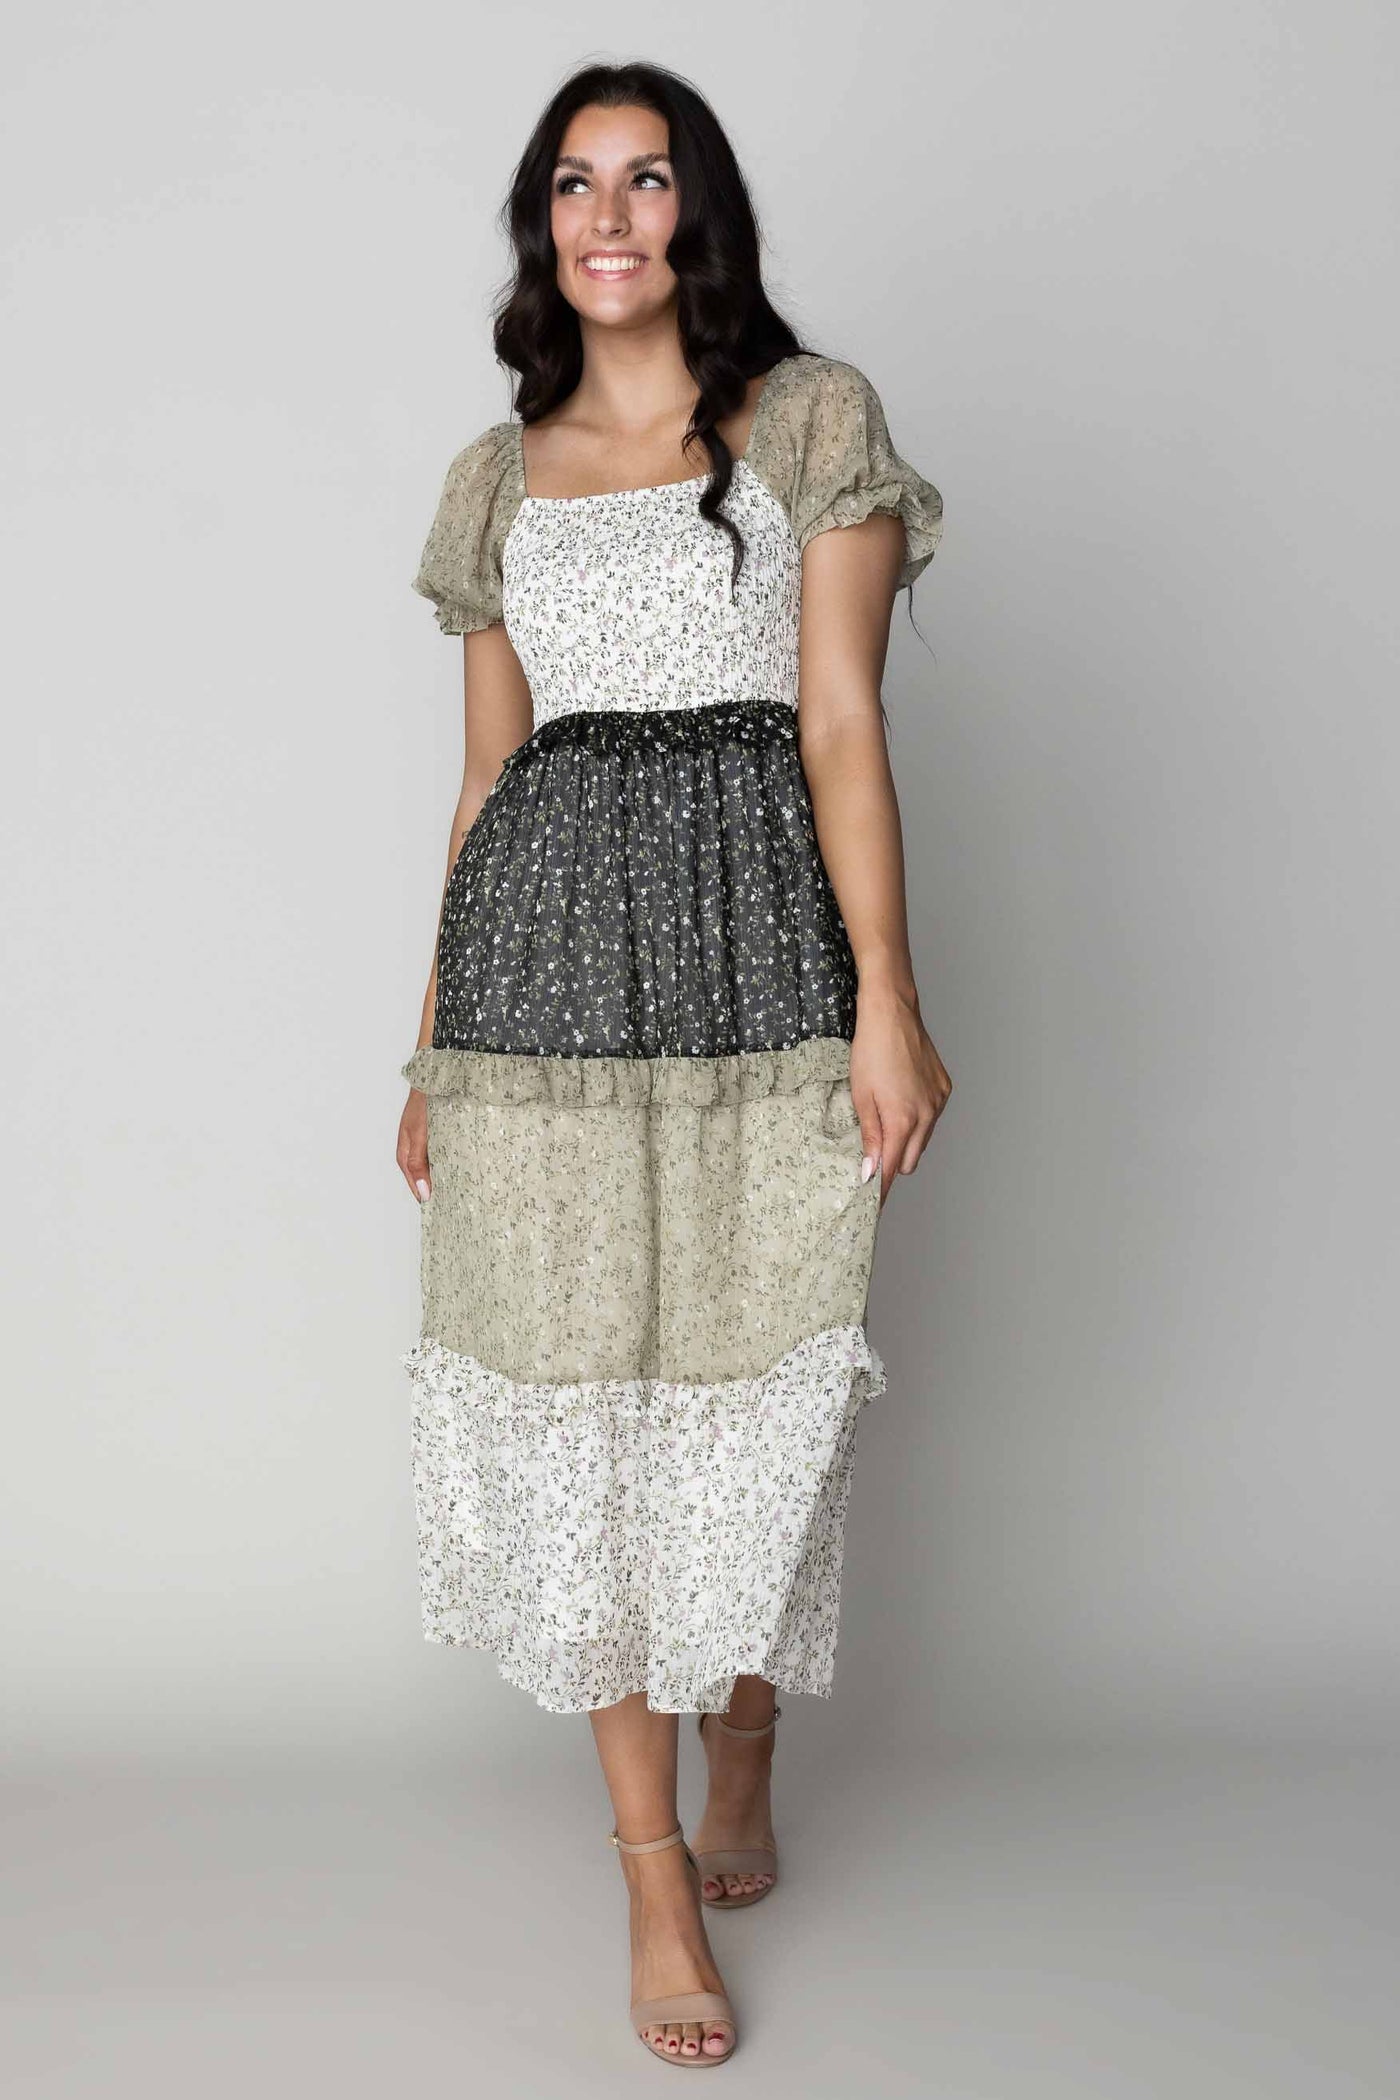 This is a modest dress wih tiered skirt details and features multiple colors on each tier.